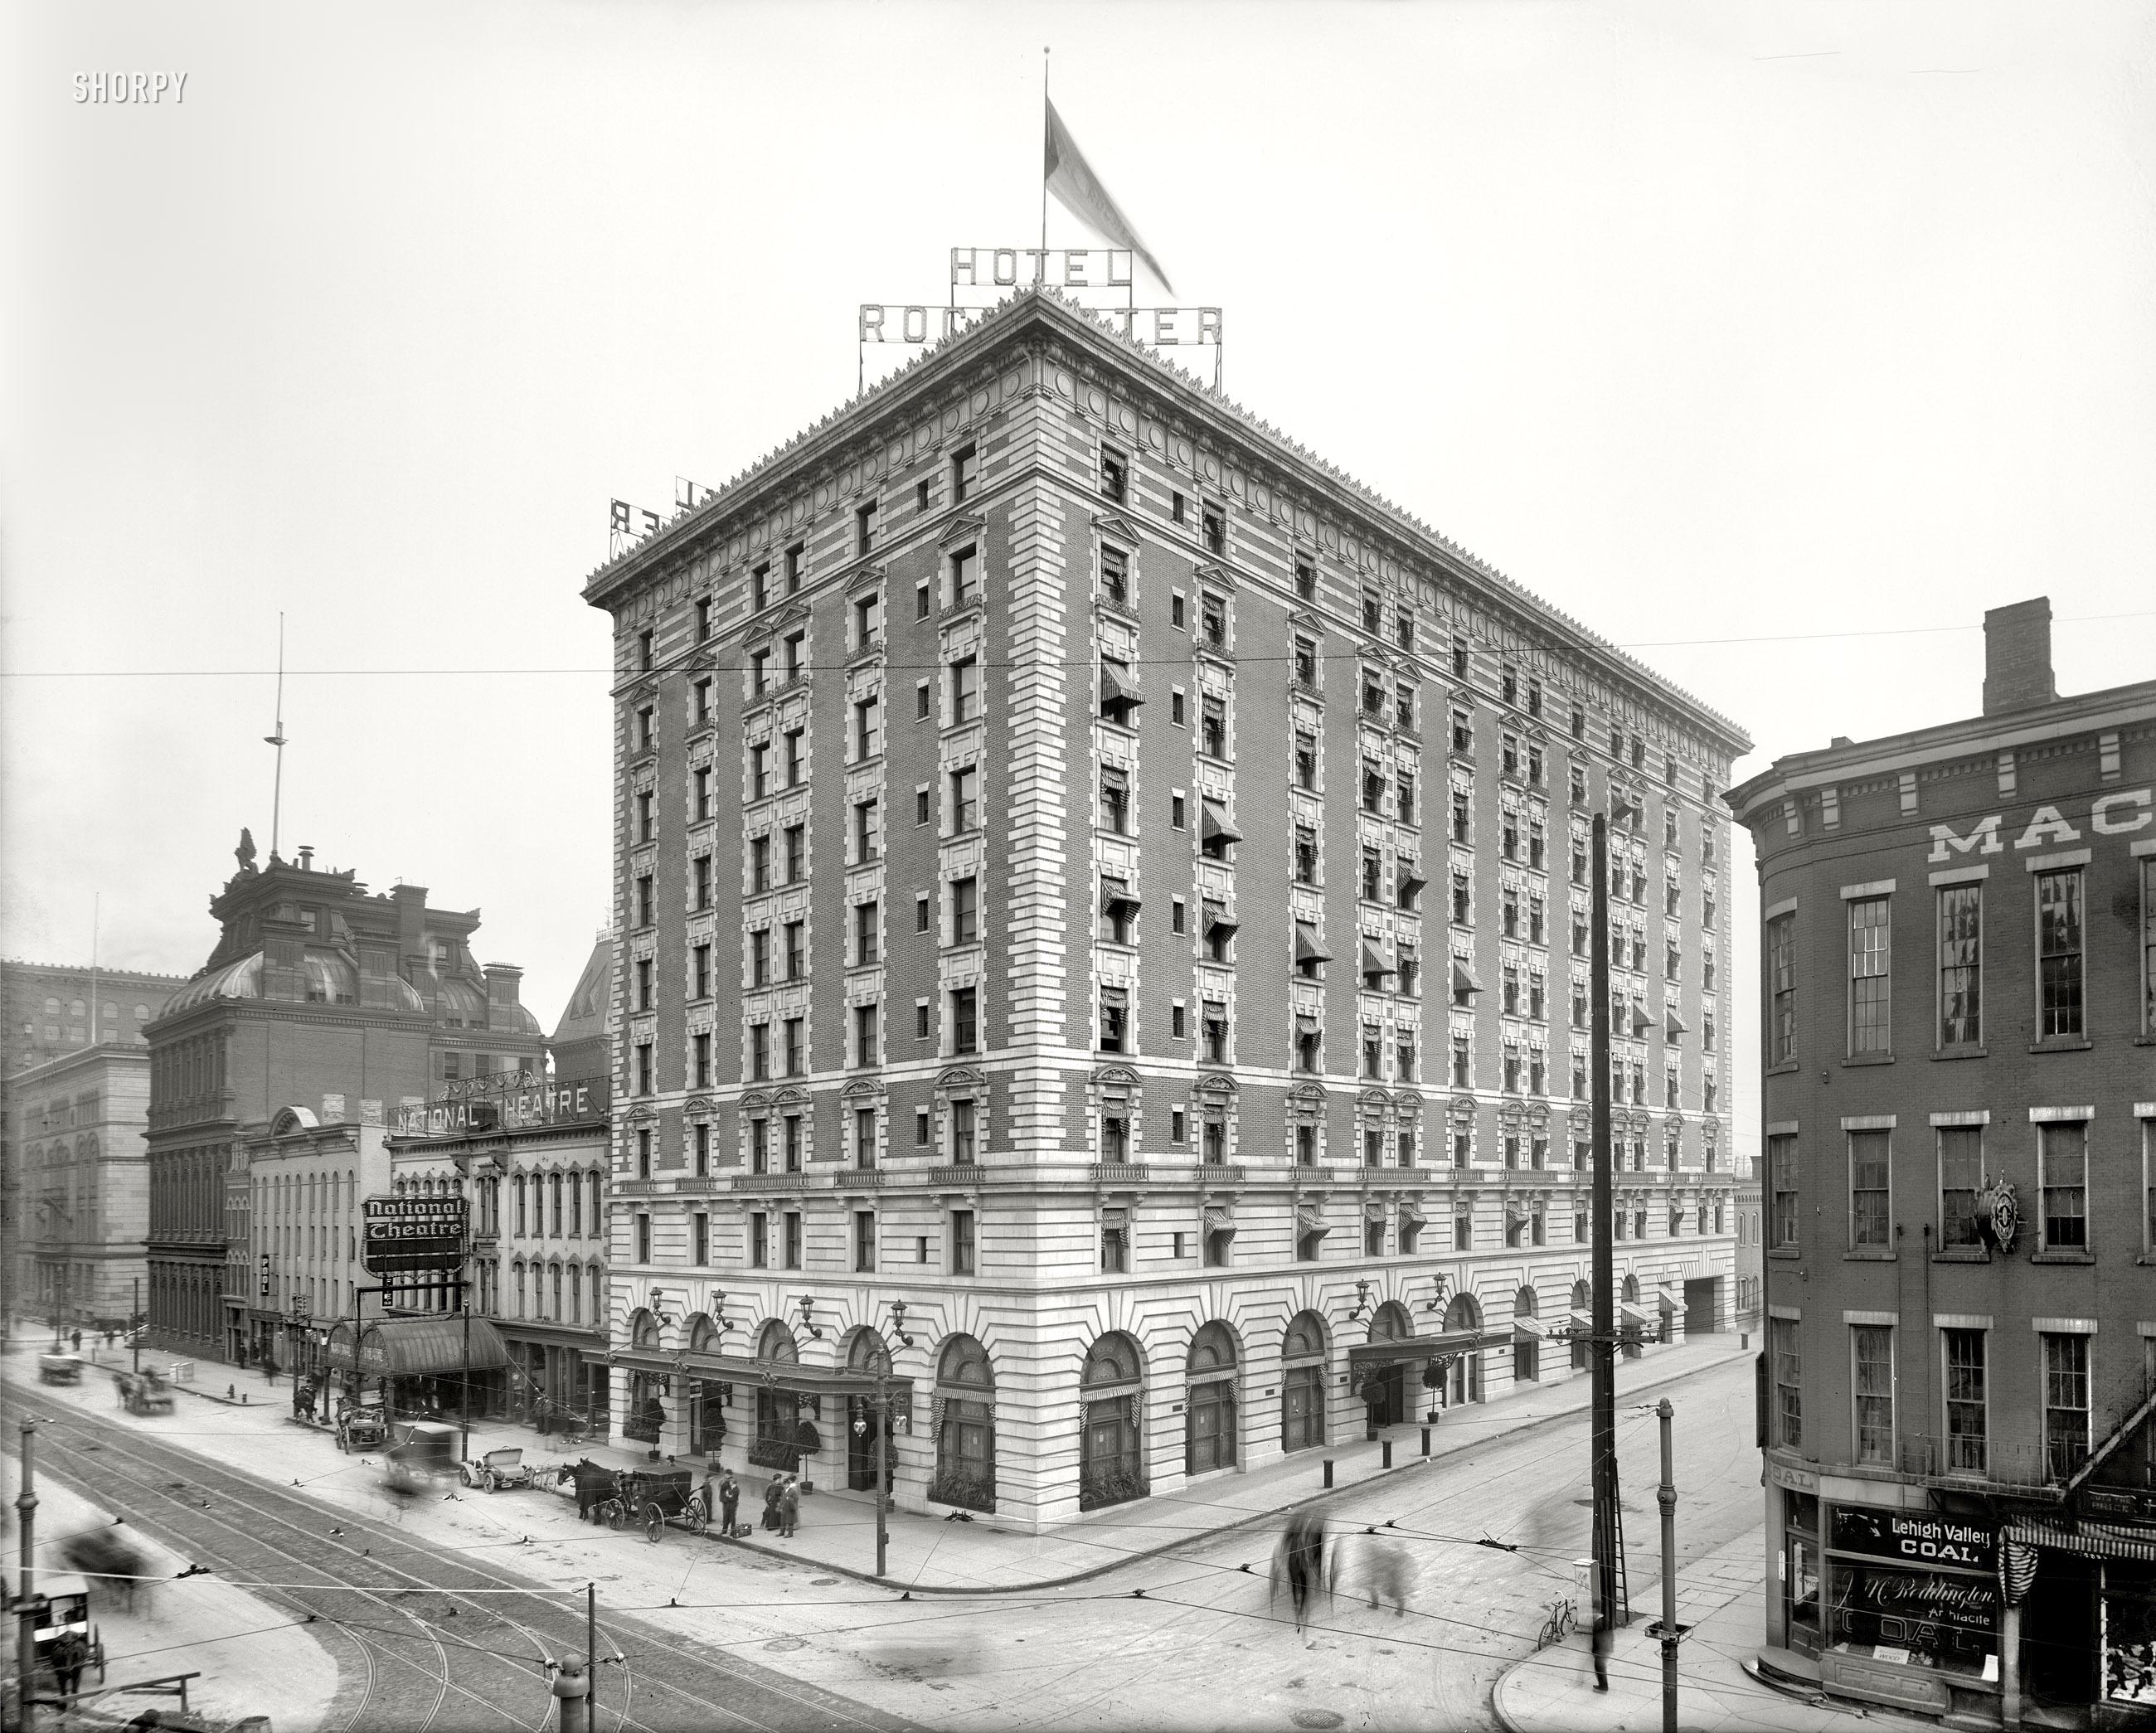 Rochester, New York, circa 1908. "Hotel Rochester, Main Street and Plymouth Avenue." 8x10 inch glass negative, Detroit Publishing Company. View full size.